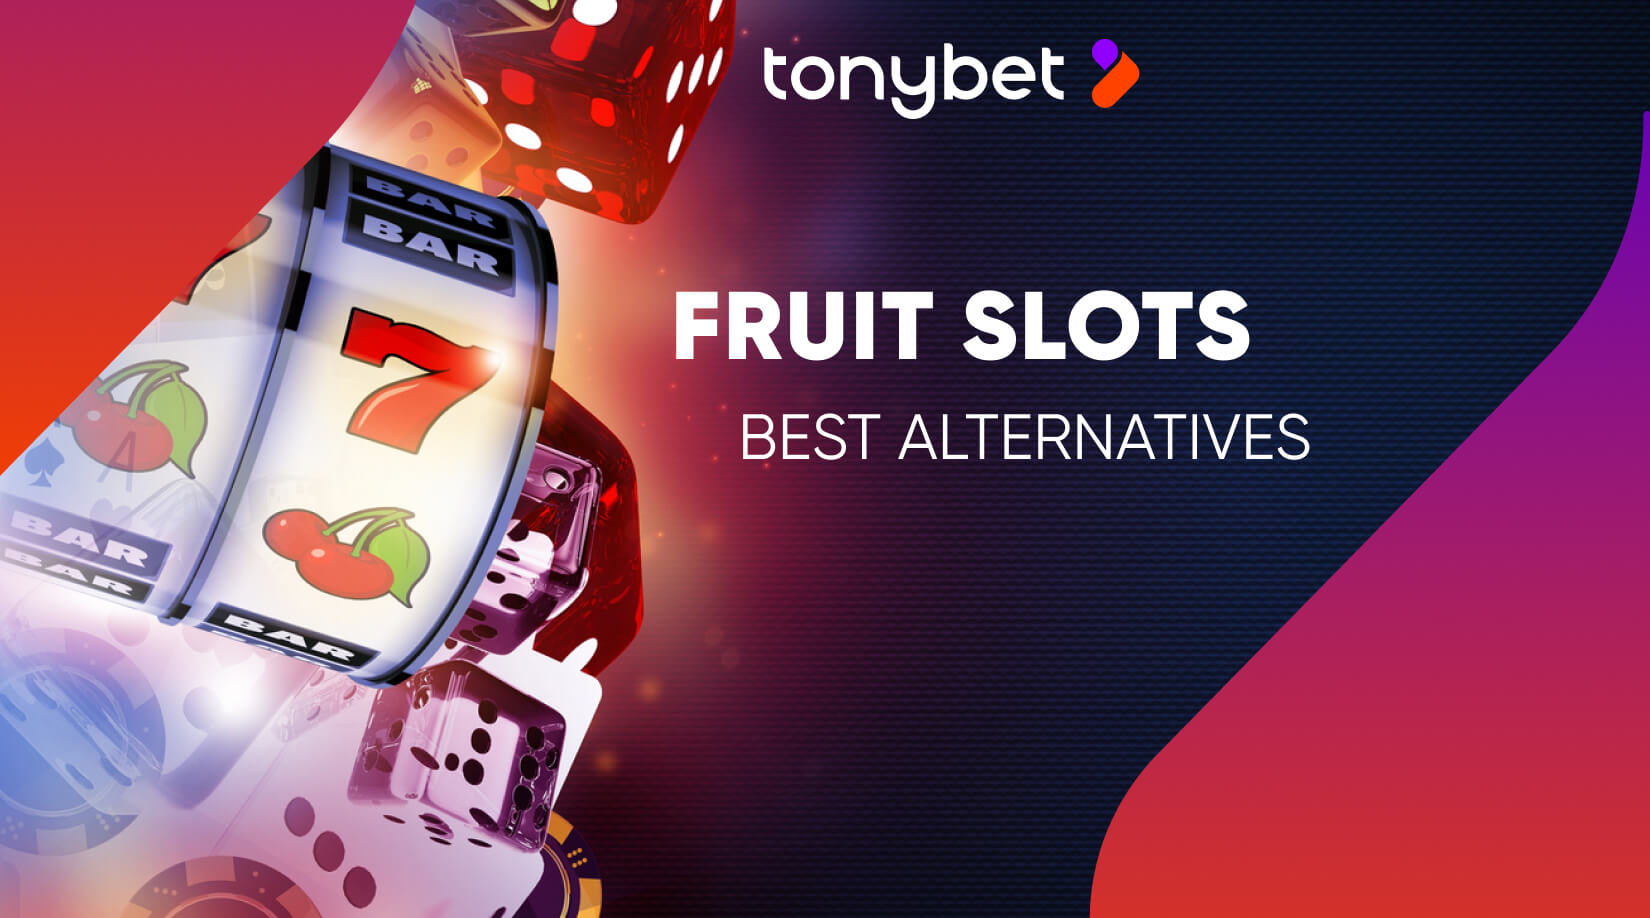 Fruit Slots Alternatives: Get Your Daily Dose of Fun With Fruity Delight